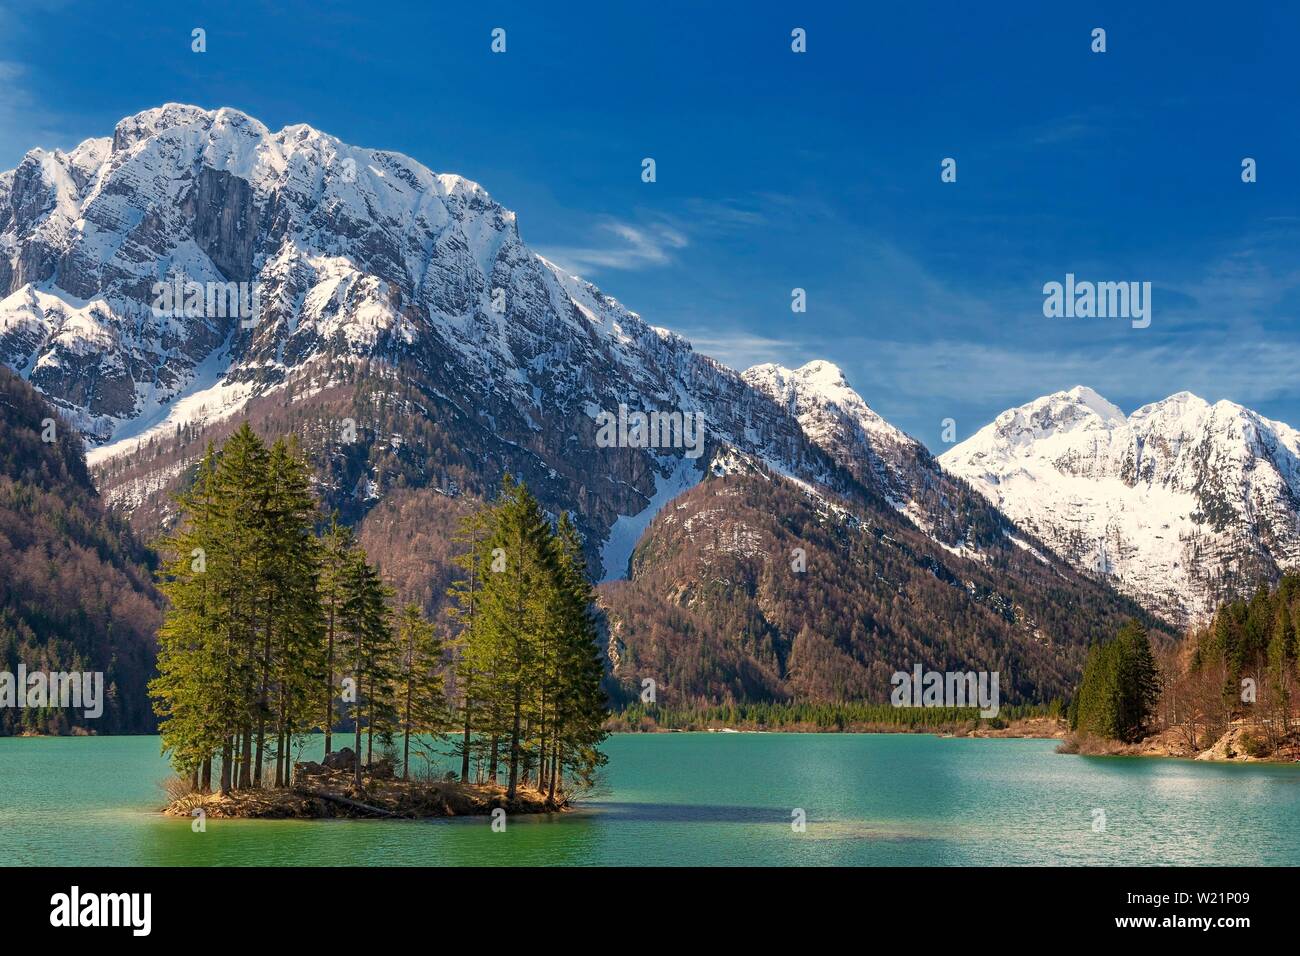 Lake Raibl with small tree island, snow-capped mountains at the back, Julian Alps, Upper Ukraine, Slovenia Stock Photo